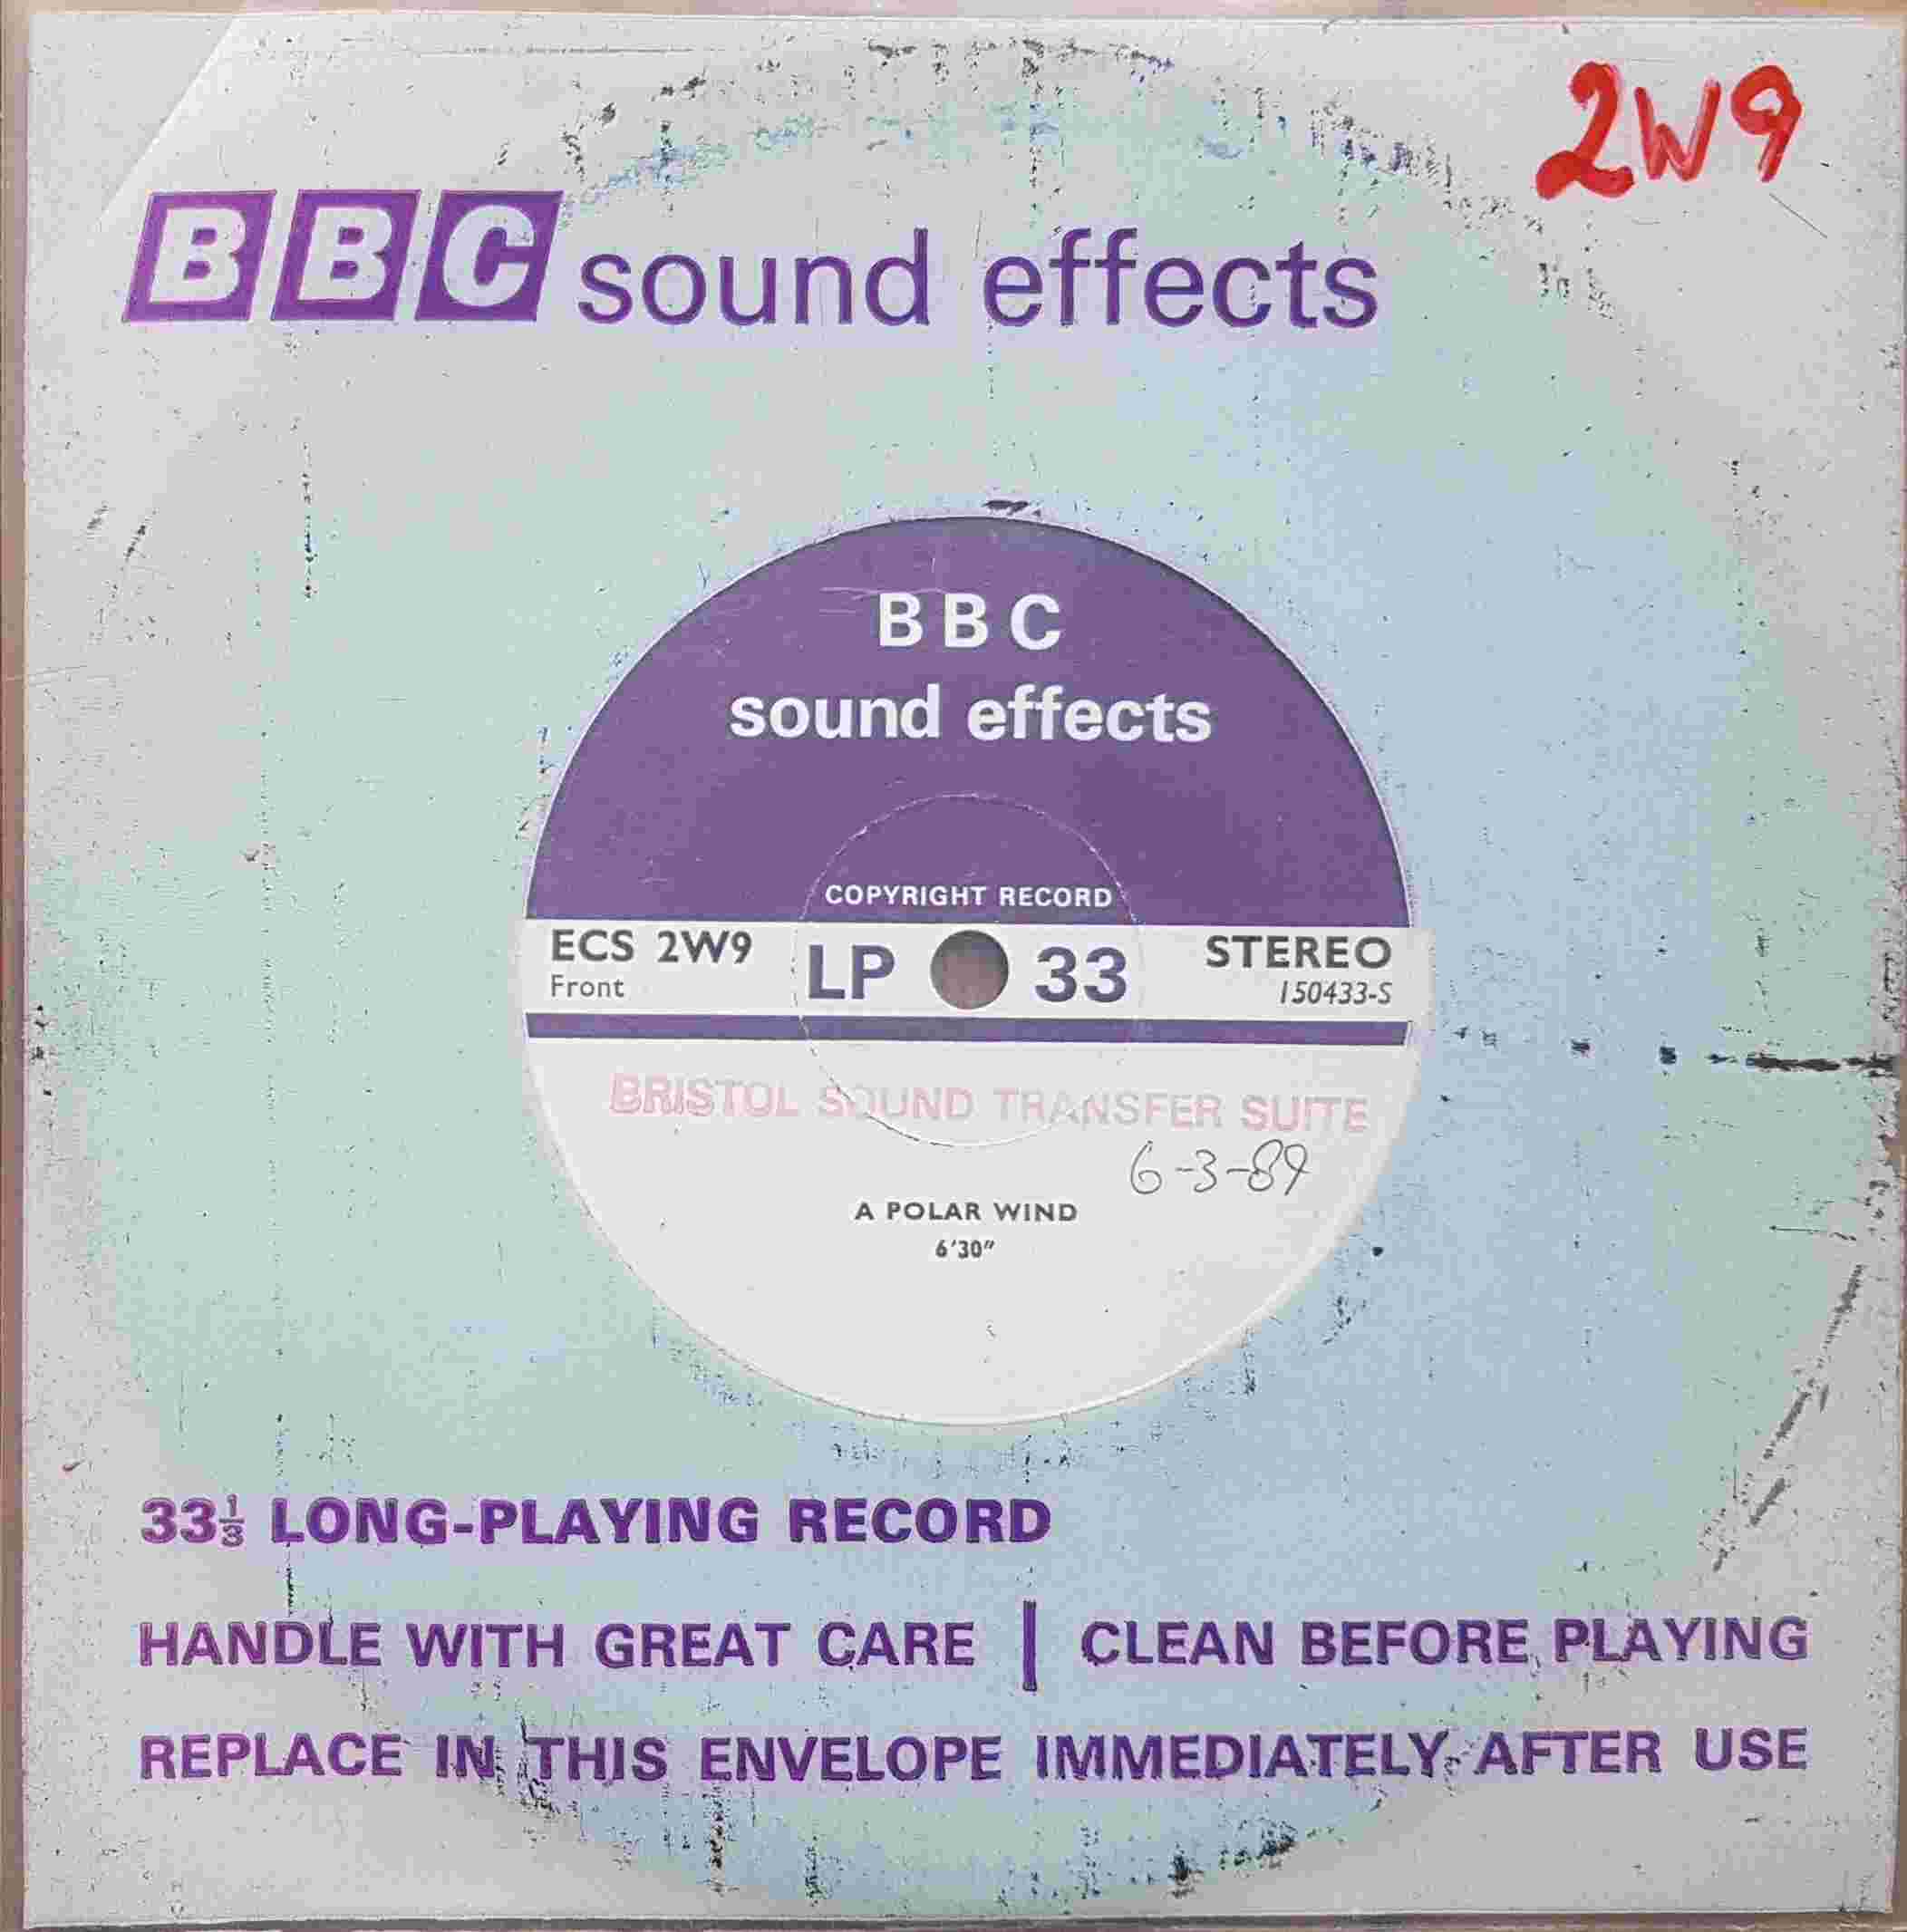 Picture of ECS 2W9 A polar wind / Howling wind by artist Not registered from the BBC singles - Records and Tapes library